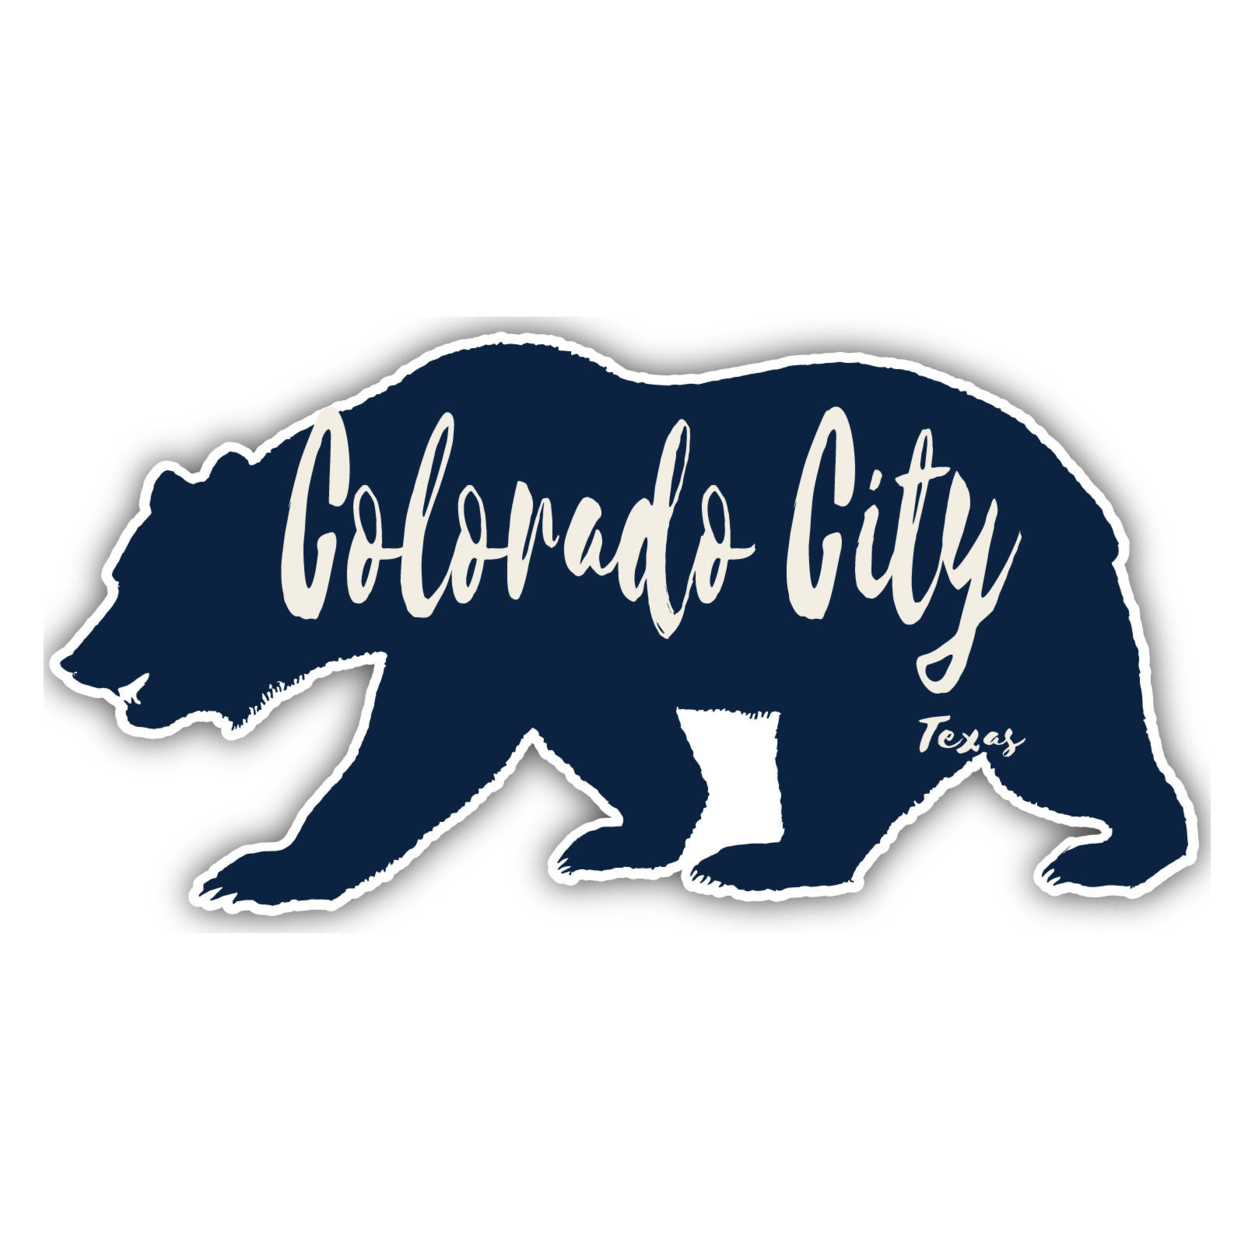 Colorado City Texas Souvenir Decorative Stickers (Choose Theme And Size) - Single Unit, 10-Inch, Great Outdoors